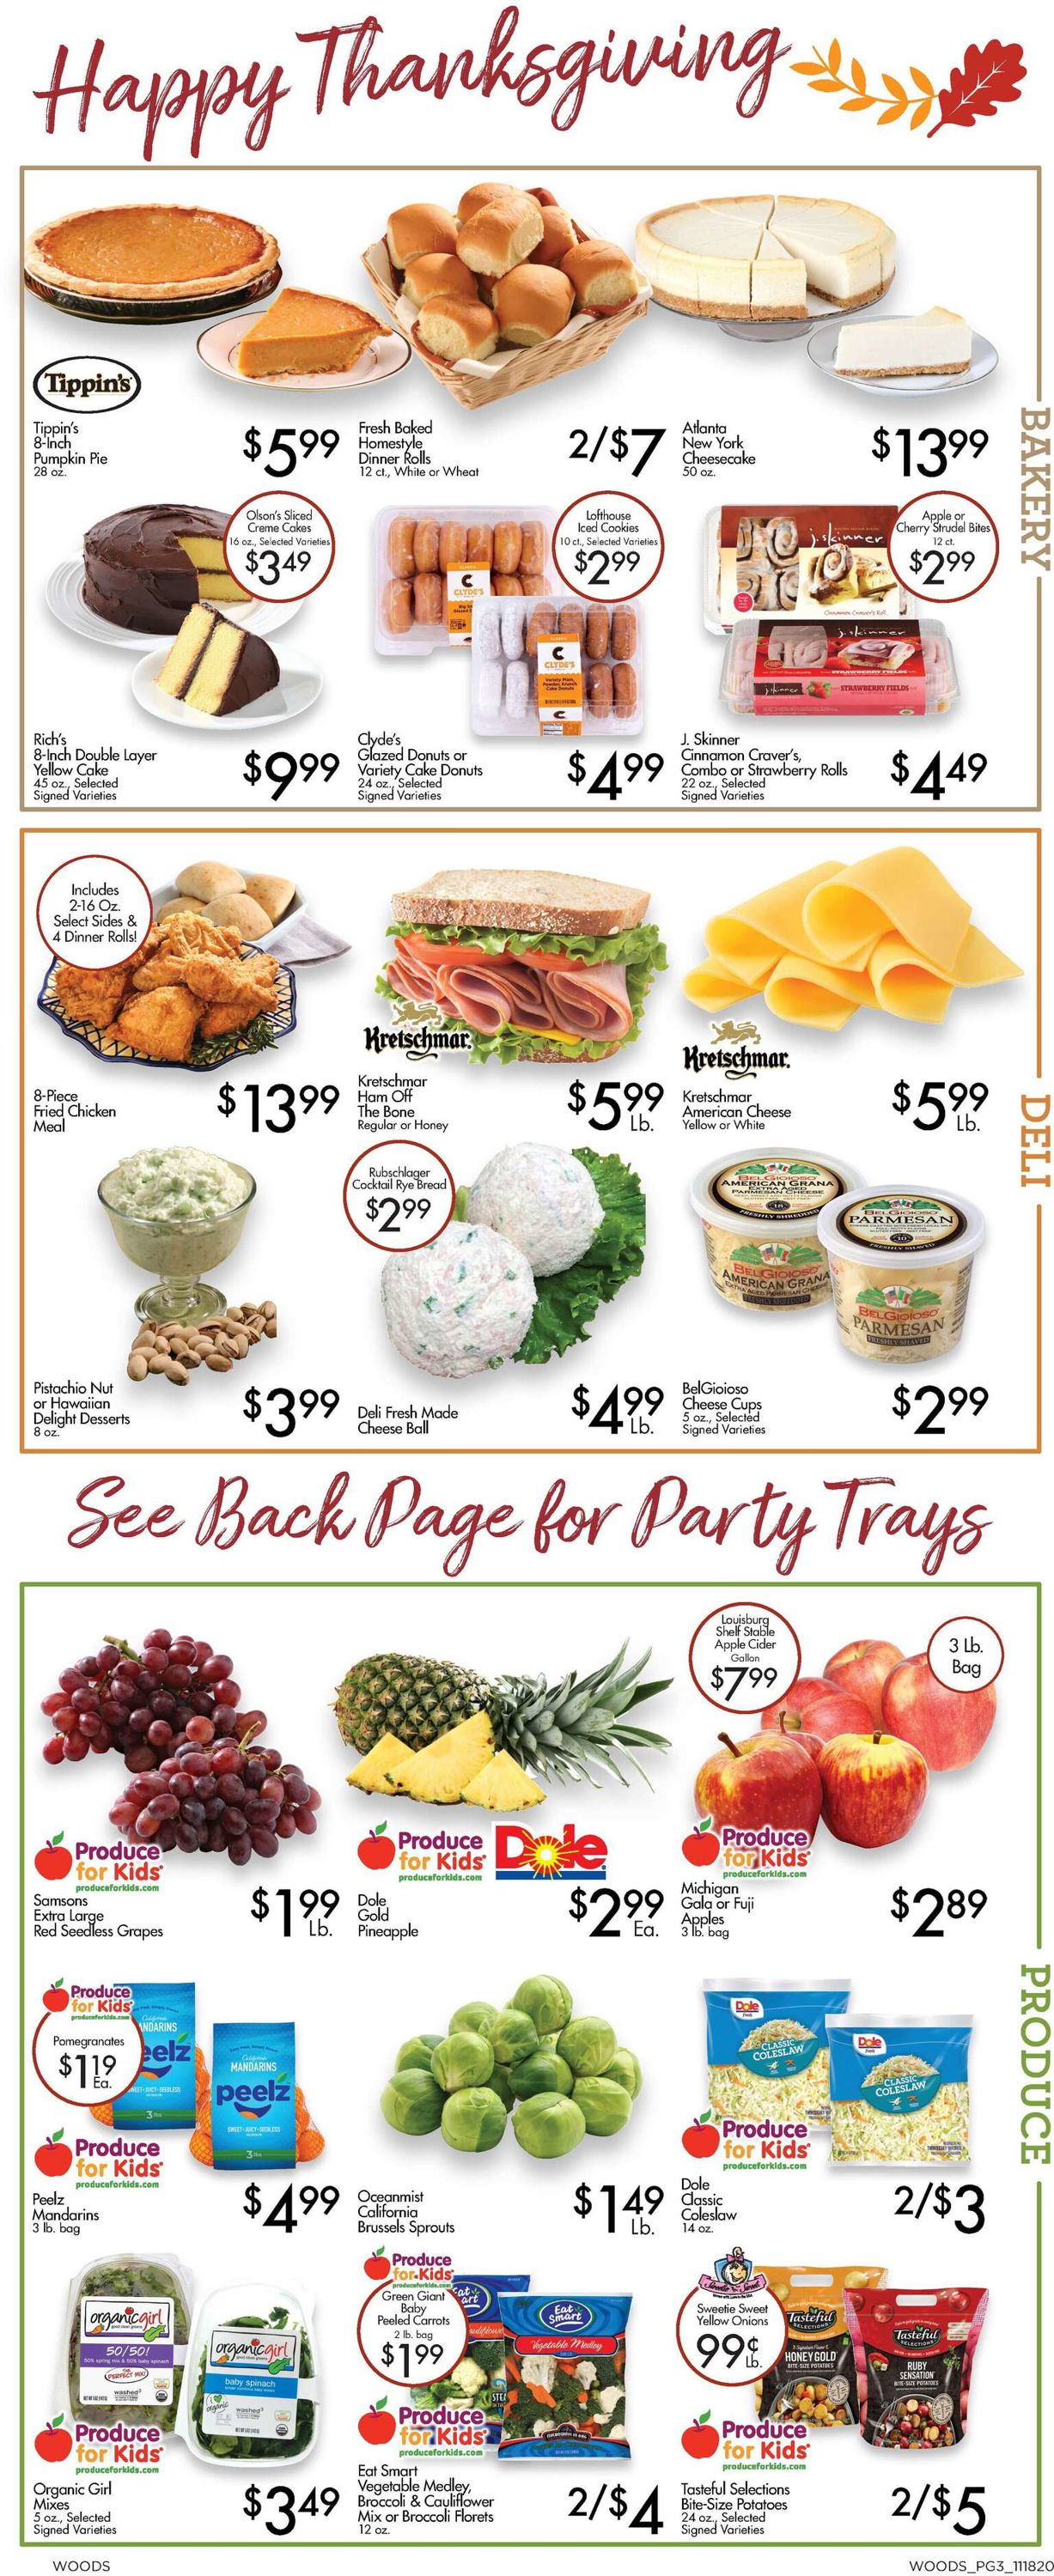 Woods Supermarket Thanksgiving ad 2020 Weekly Ad Circular - valid 11/18-11/25/2020 (Page 3)